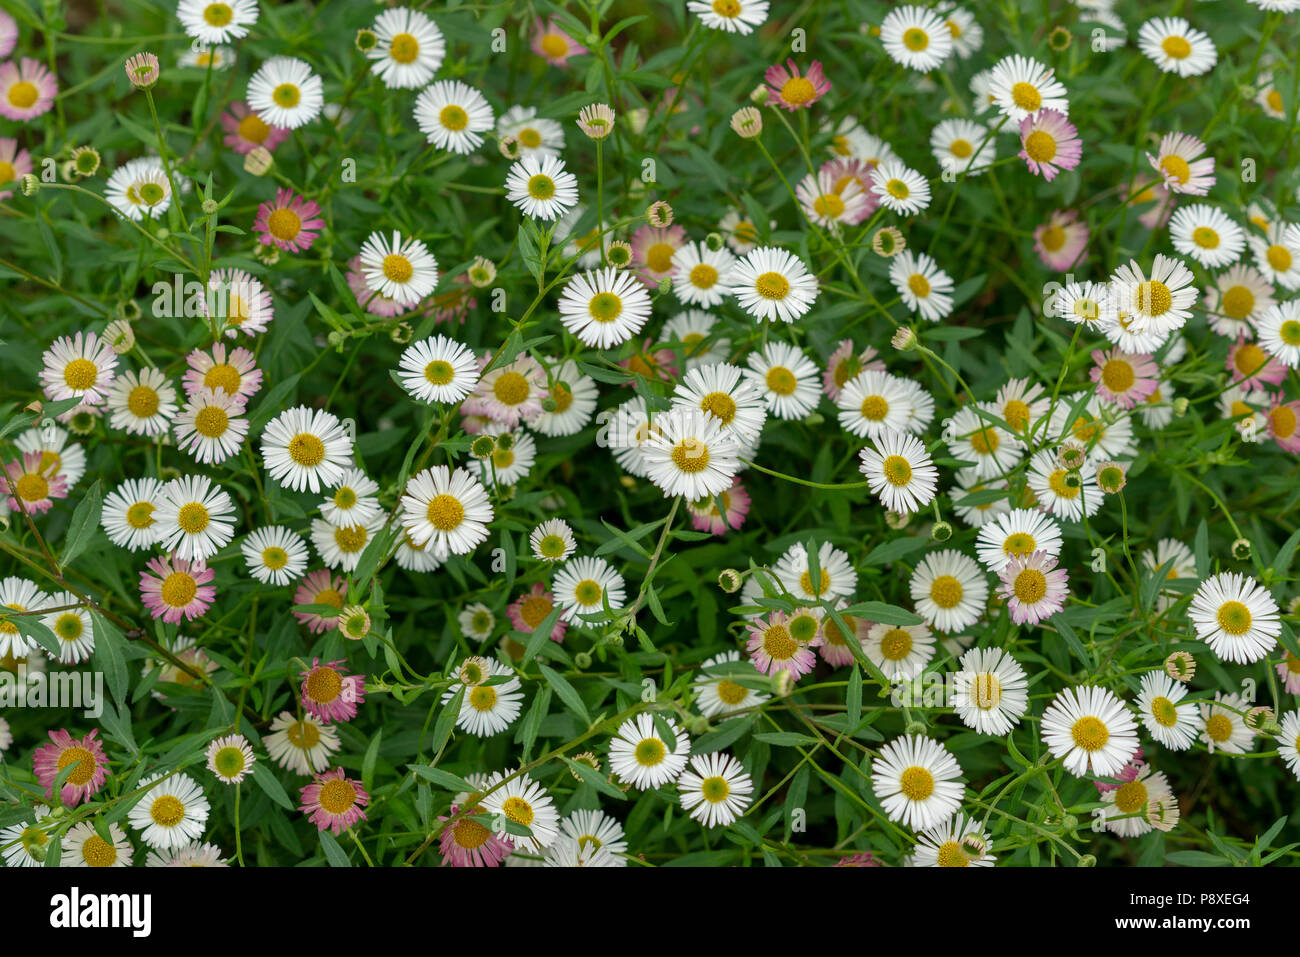 A carpet of wild daisies white and pink in color in a natural setting Stock Photo